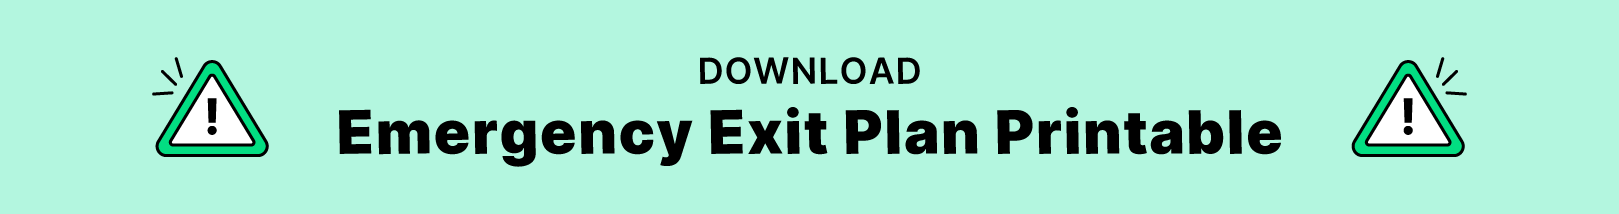 Download the emergency exit plan printable.